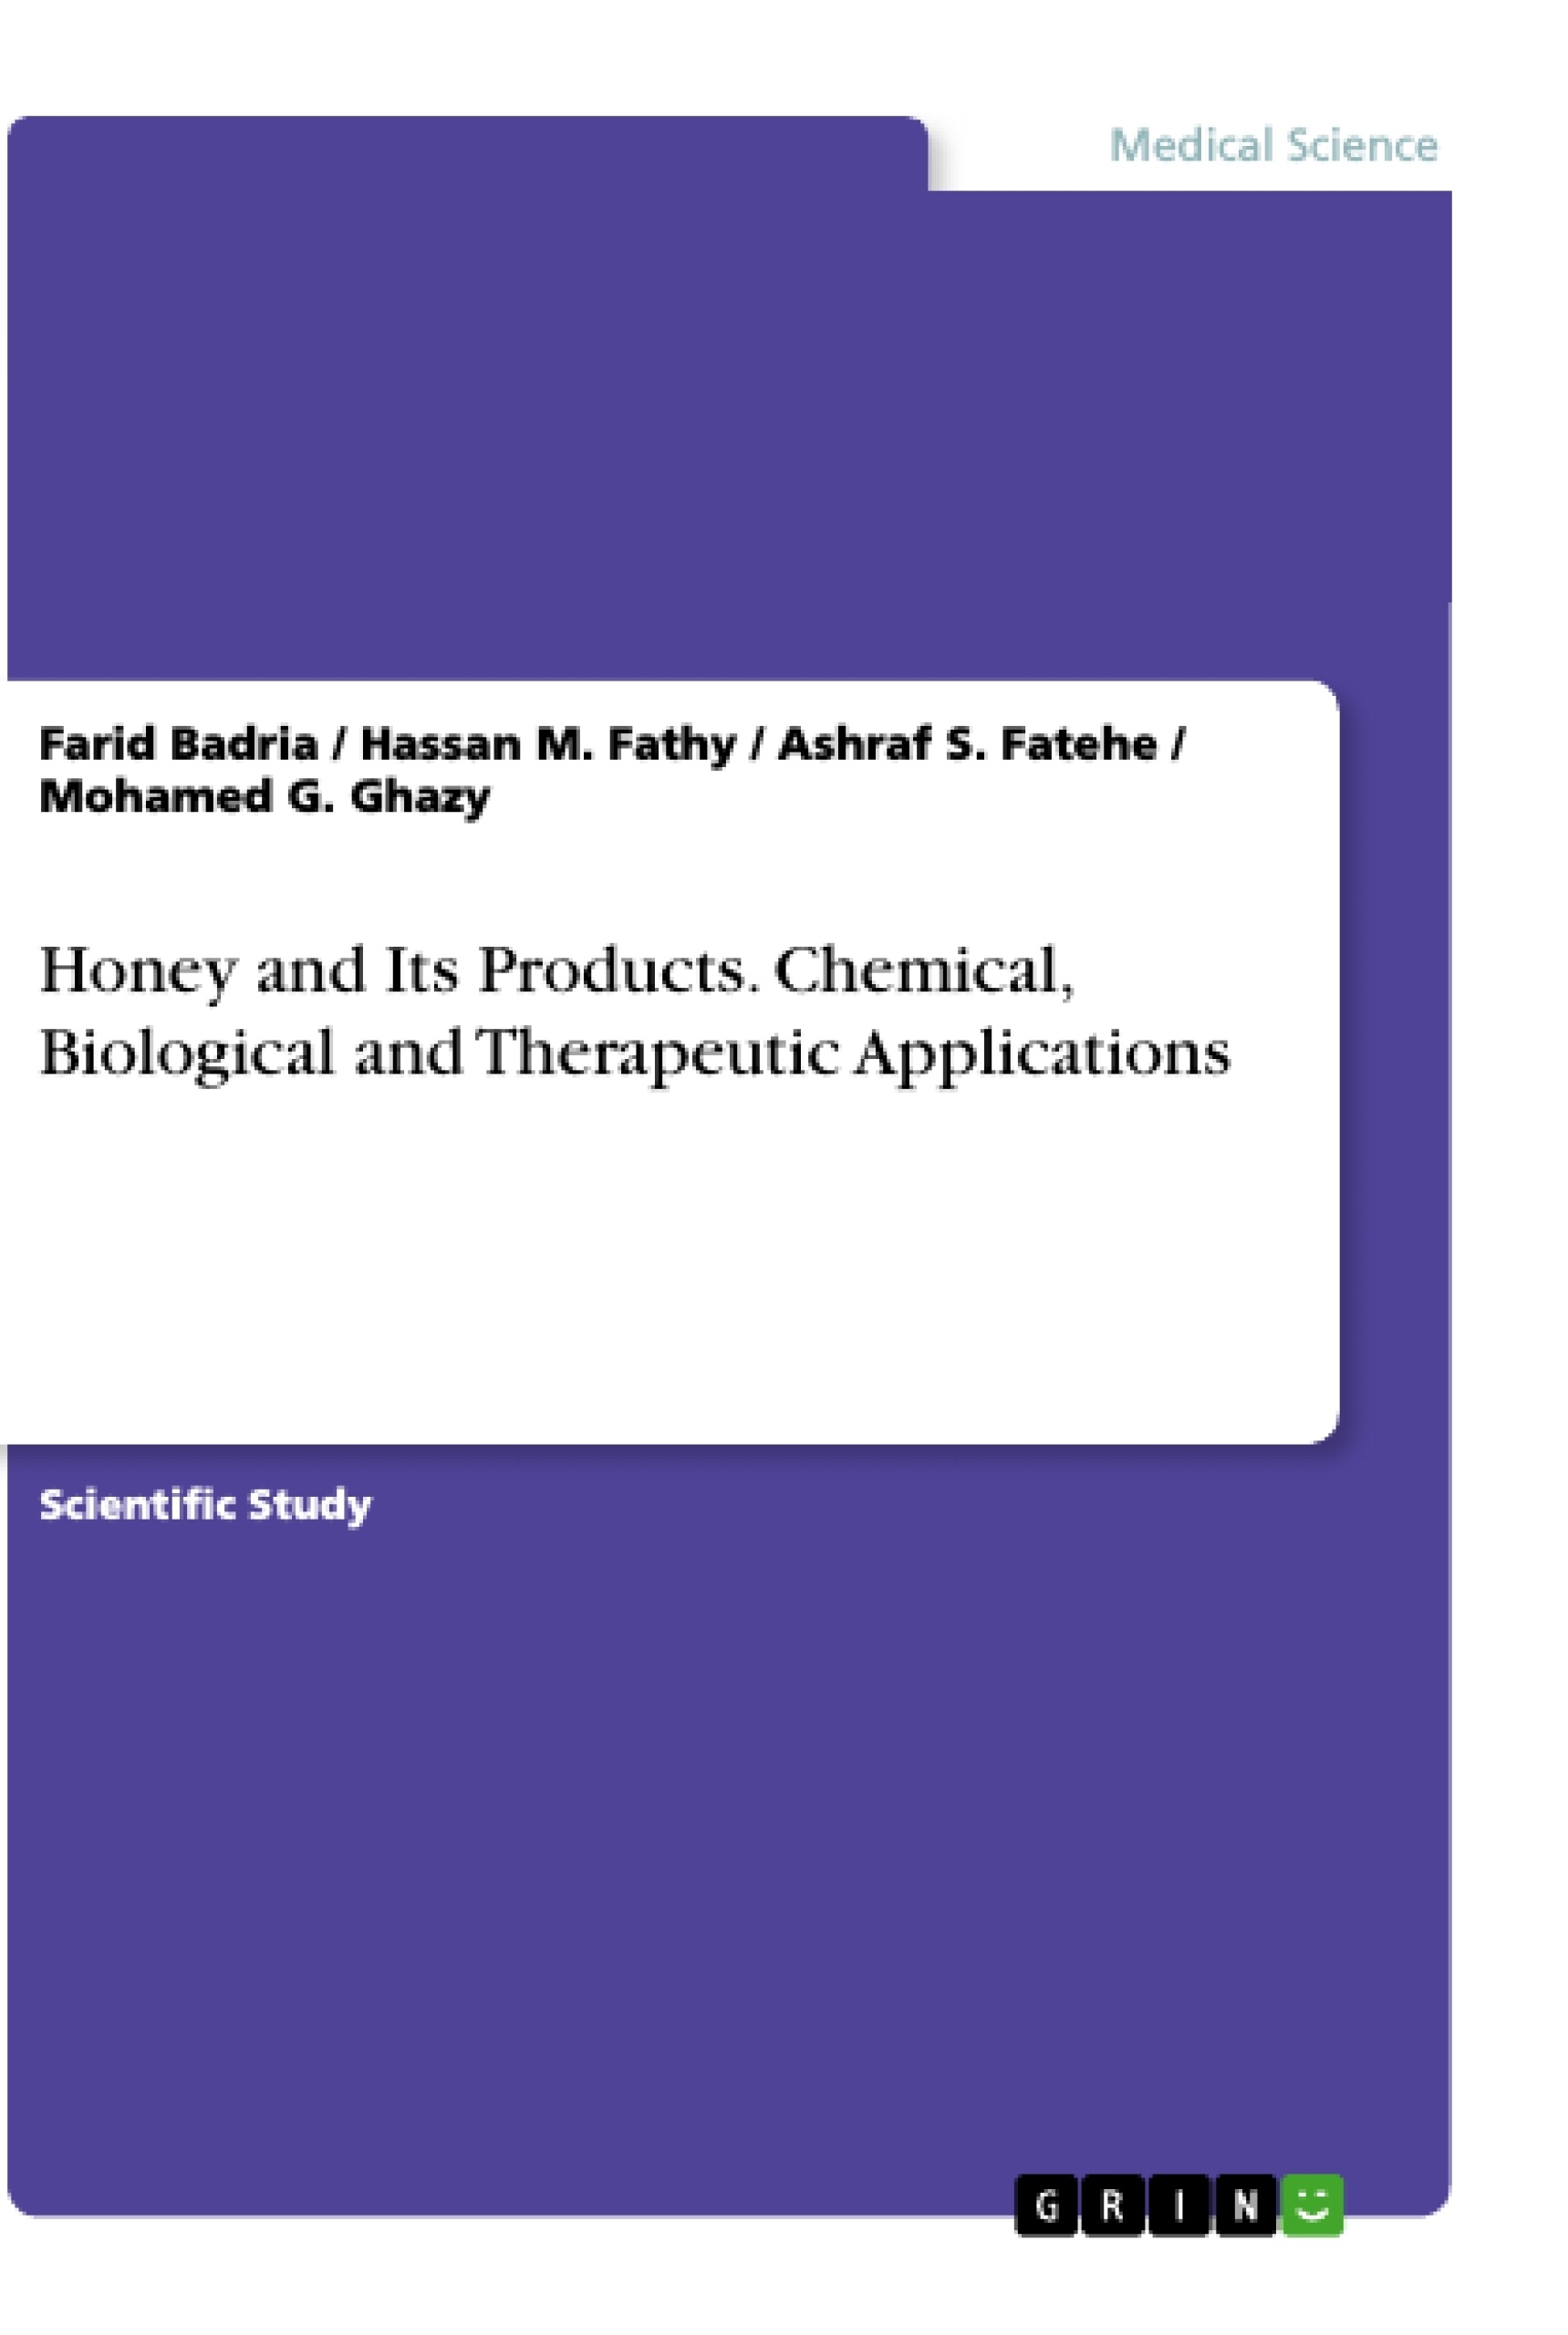 Titre: Honey and Its Products. Chemical, Biological and Therapeutic Applications